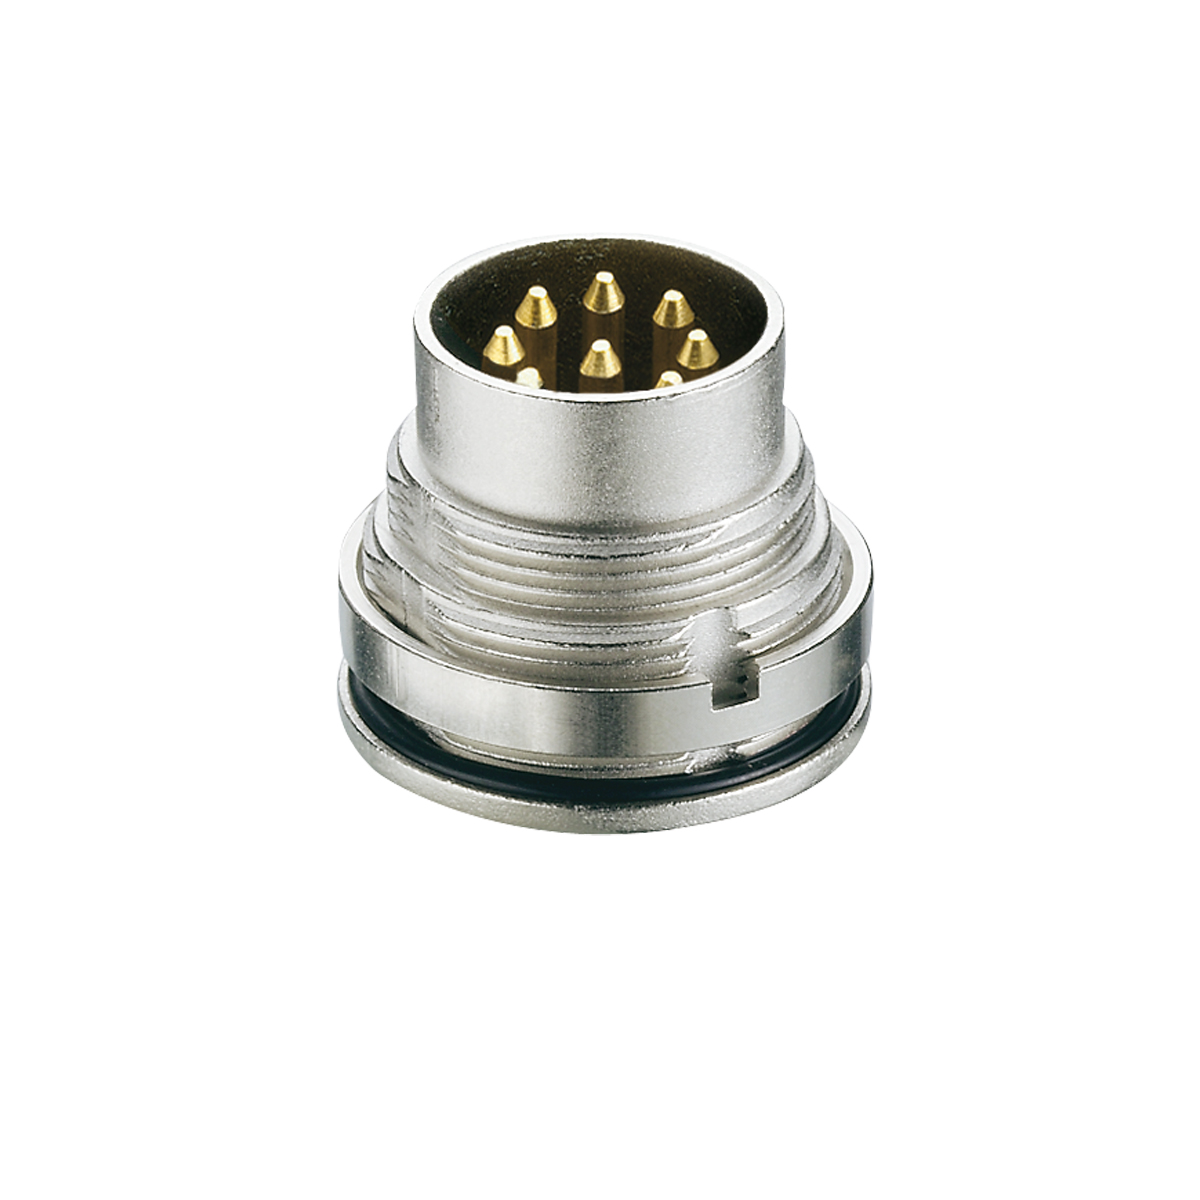 Lumberg: 0315-2 (Series 03 | Circular connectors with threaded joint M16 acc. to IEC 61076-2-106, IP40/IP68)